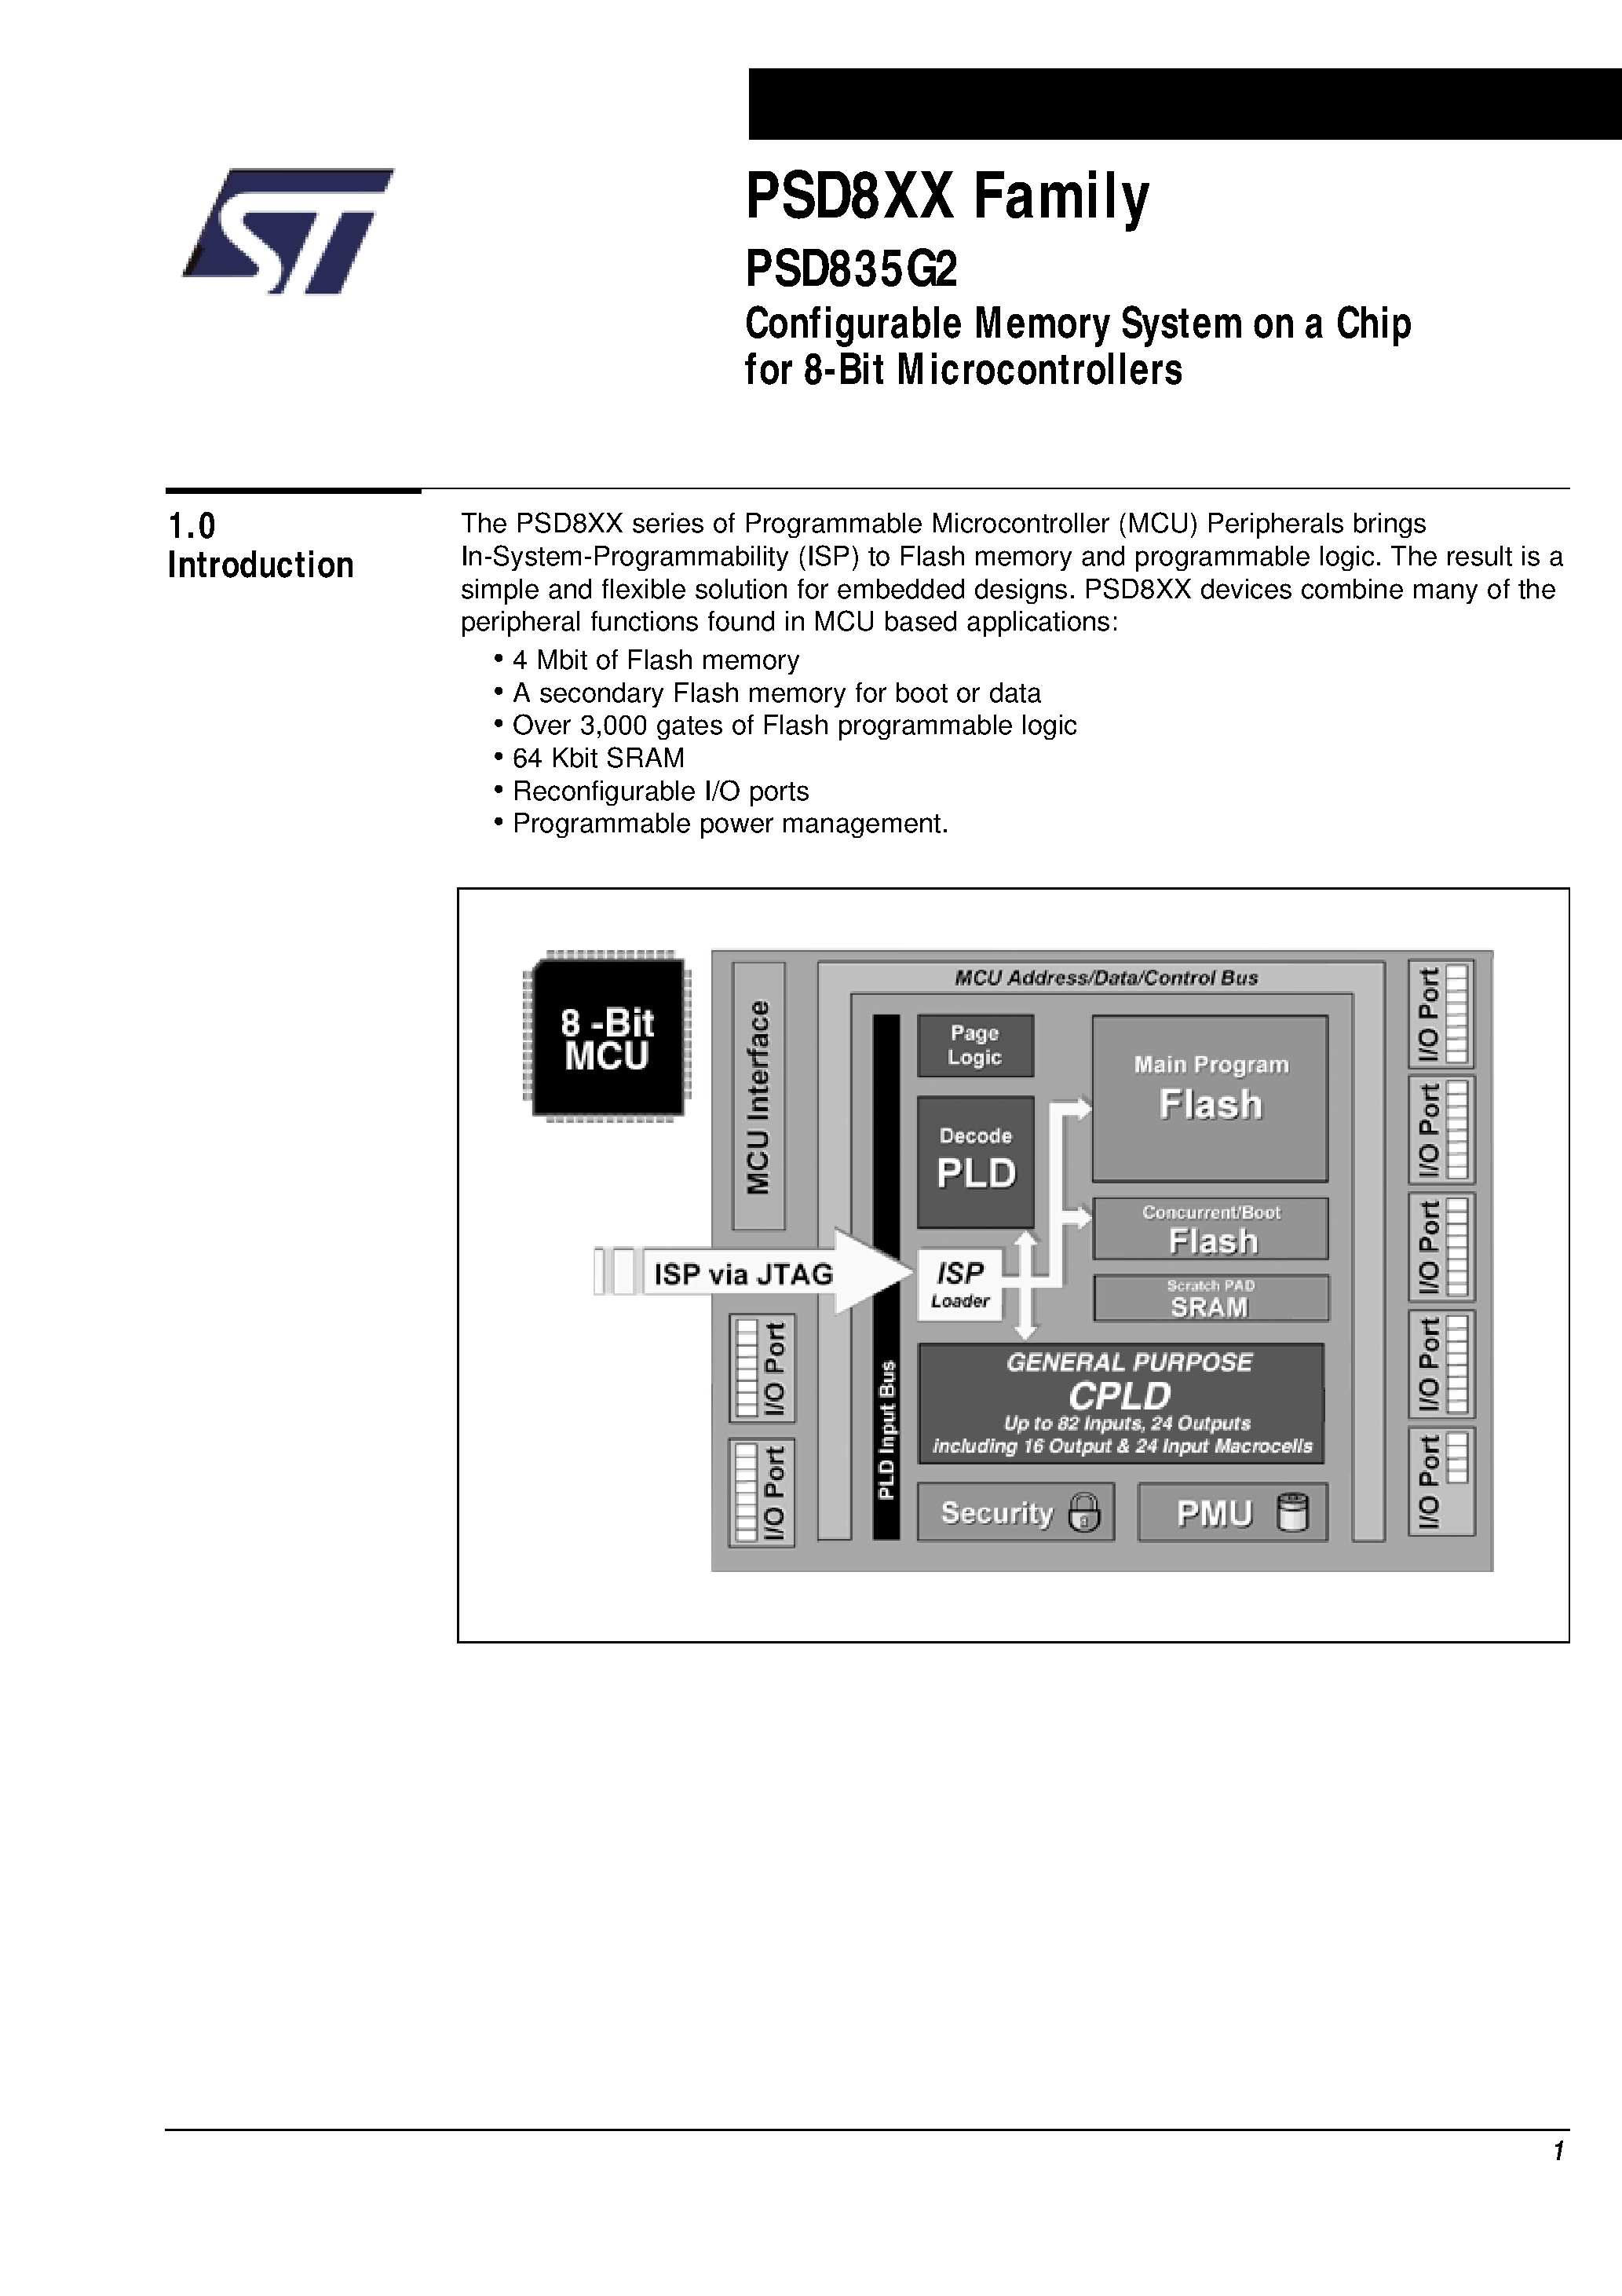 Datasheet PSD835F1V-A-70UI - Configurable Memory System on a Chip for 8-Bit Microcontrollers page 2